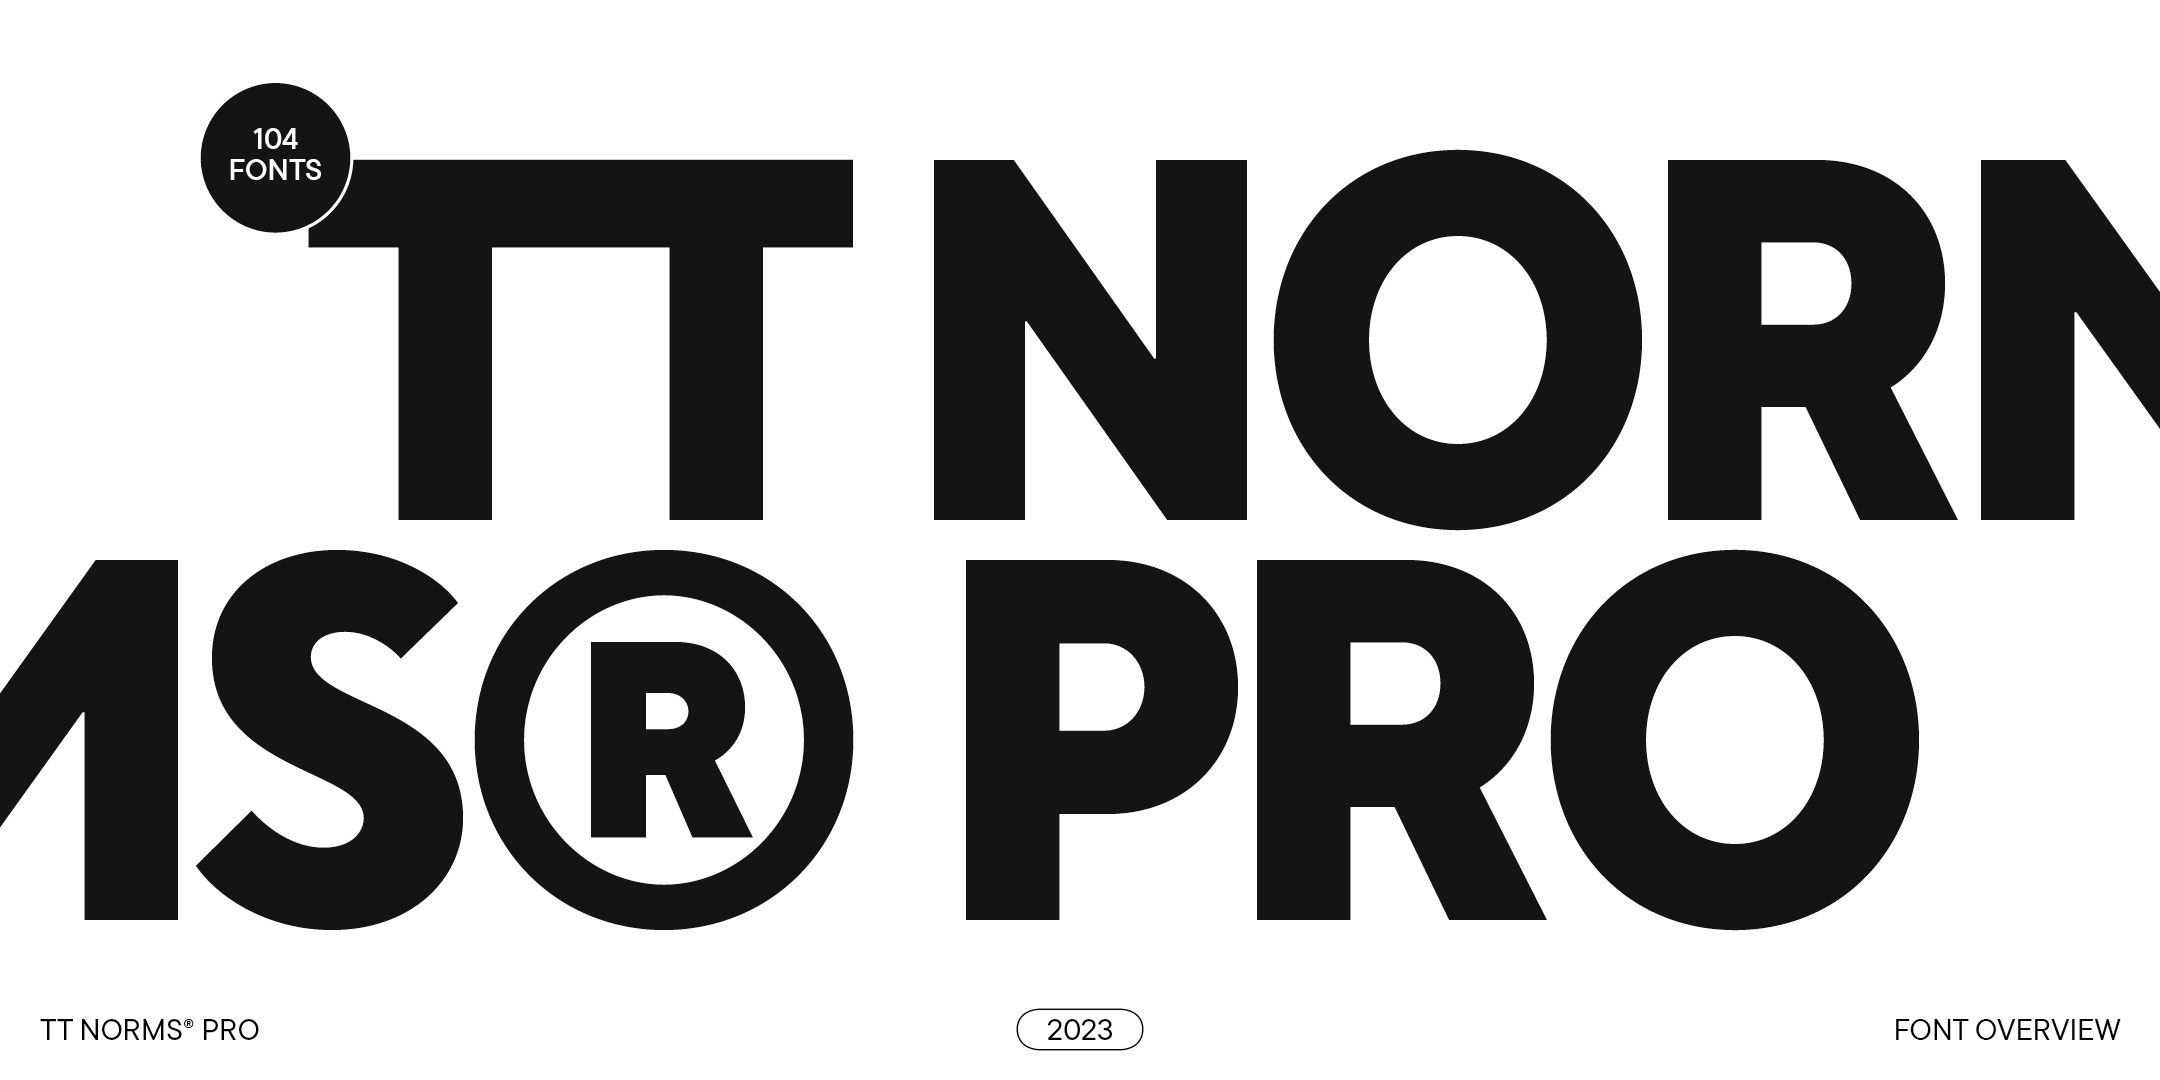 Norms pro шрифт. TT Norms. Norms font. TT Norms Pro EXTRABOLD. Шрифт Norms Pro normal.